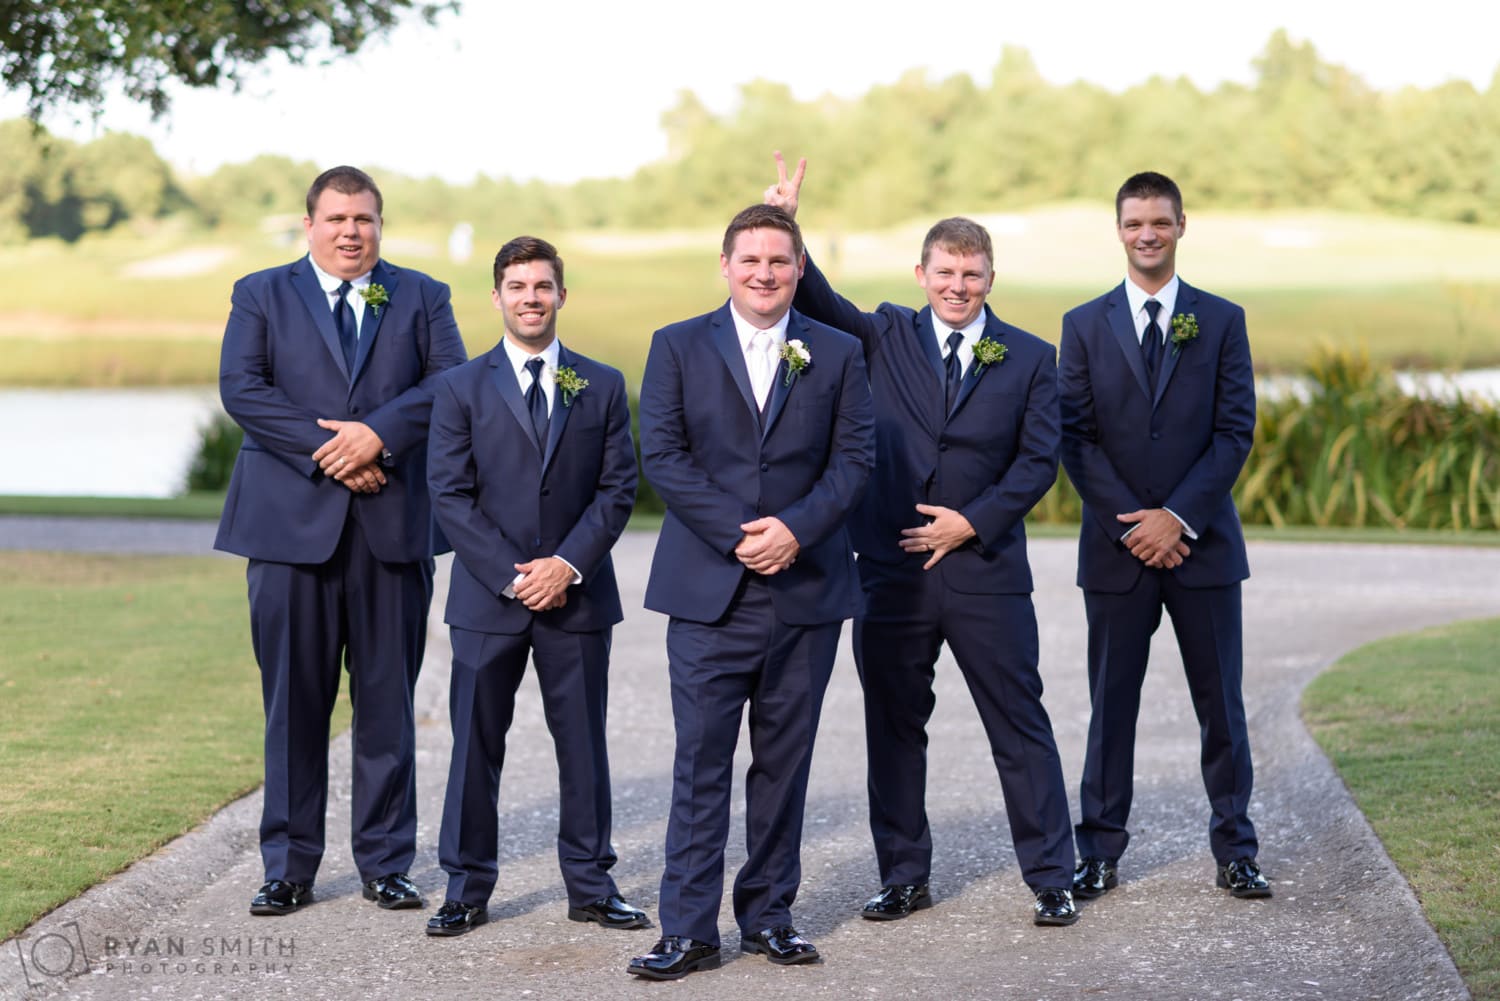 Pictures with the groomsmen before the ceremony - Dye Club at Barefoot Resort